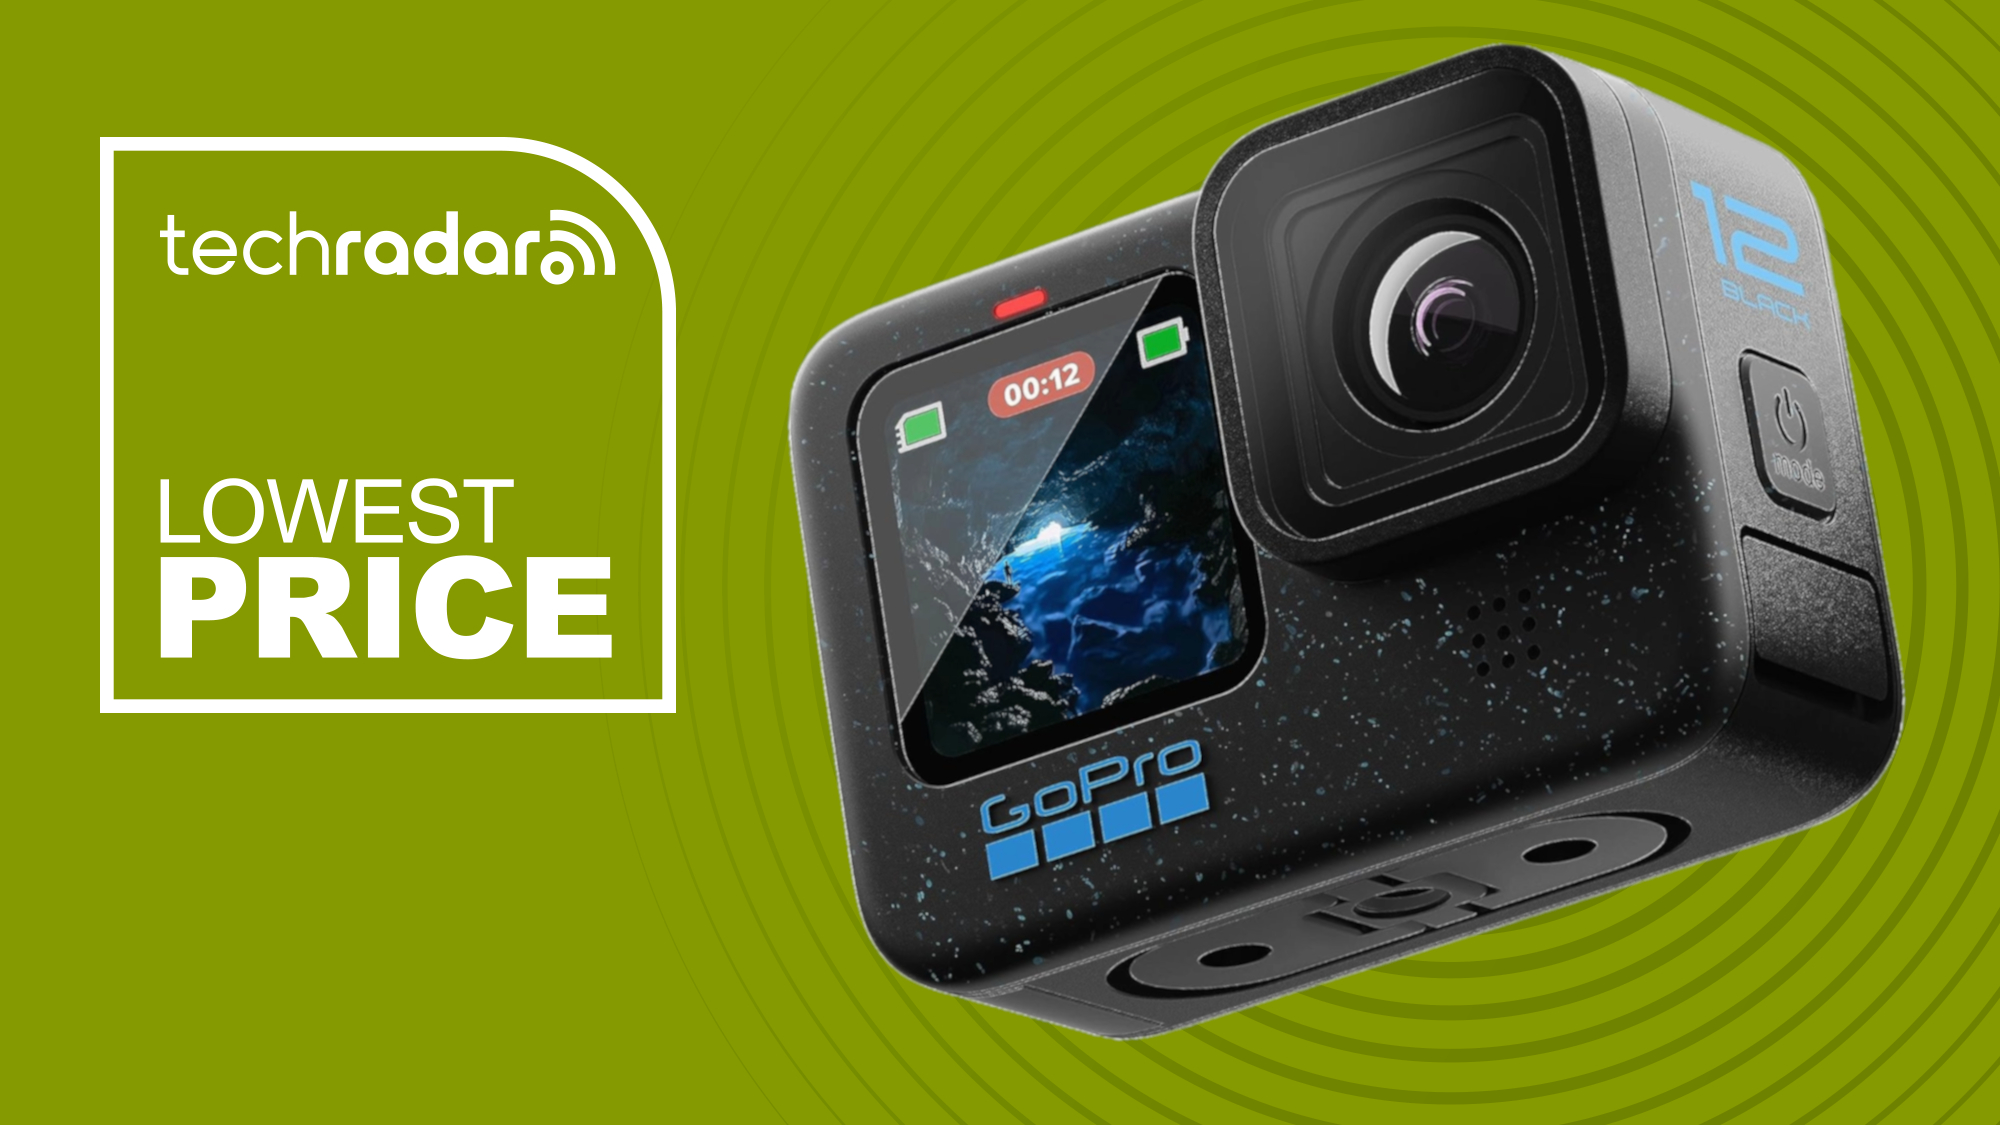 The new GoPro Hero 12 Black is now on sale – but this Hero 11